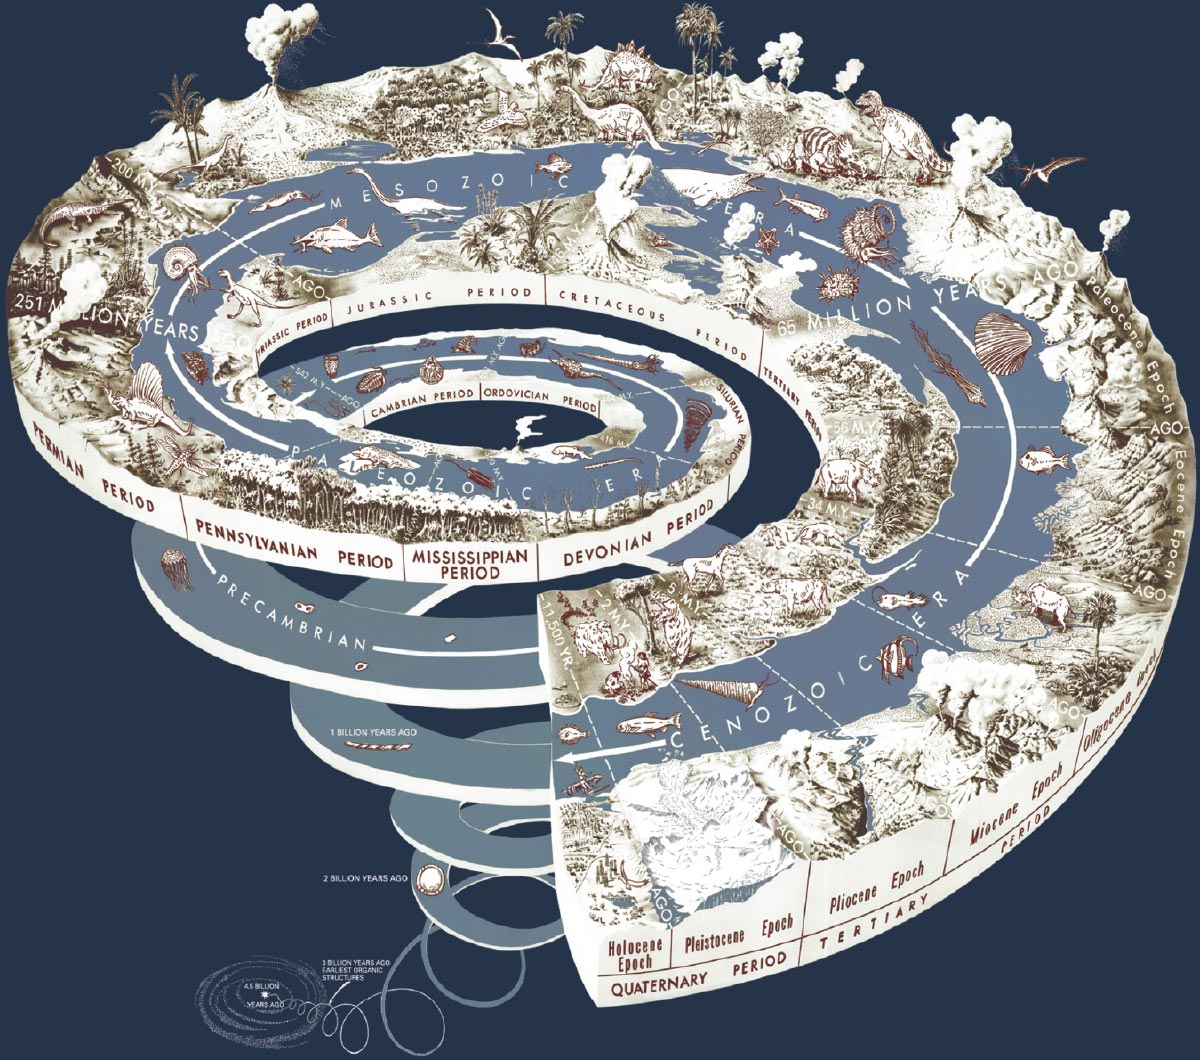 Spiral representation of Earth in geological time